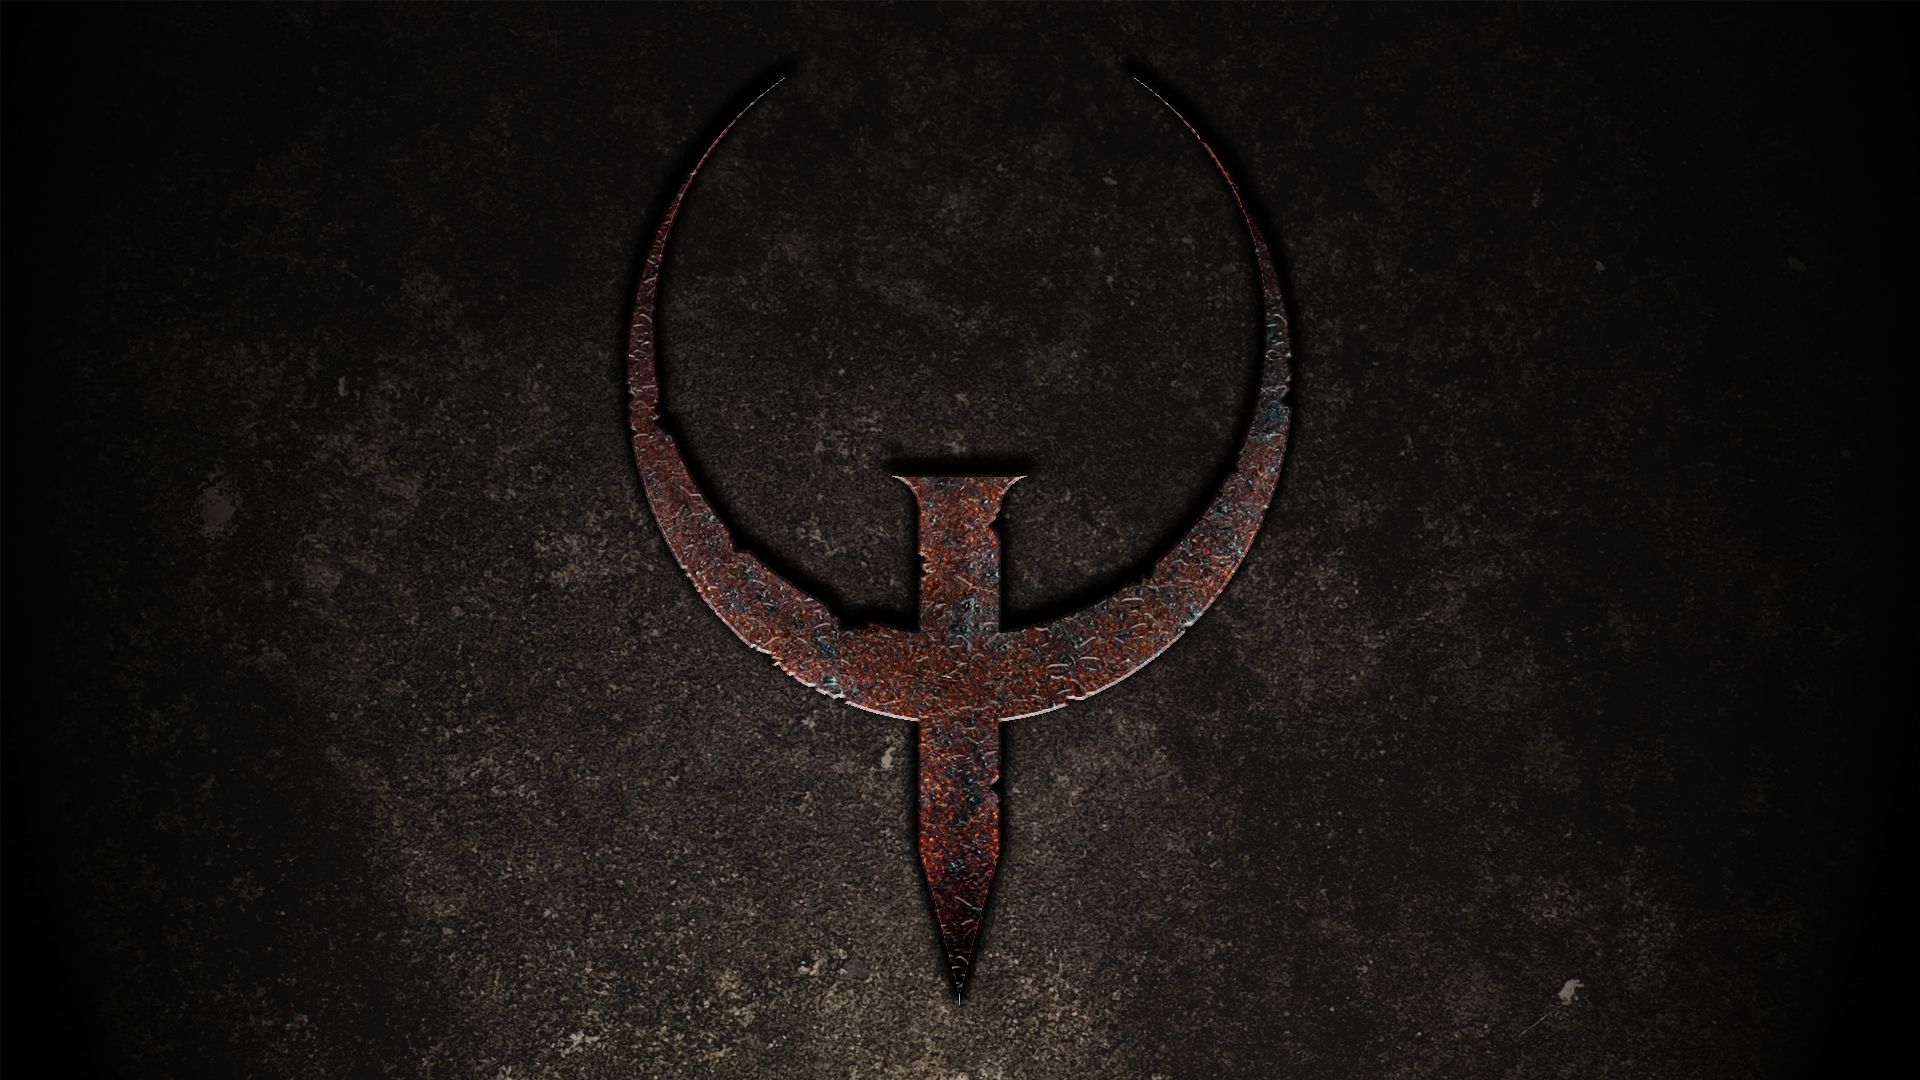 Slayer's Testaments is a Doom Eternal mod for the original Quake, early version released